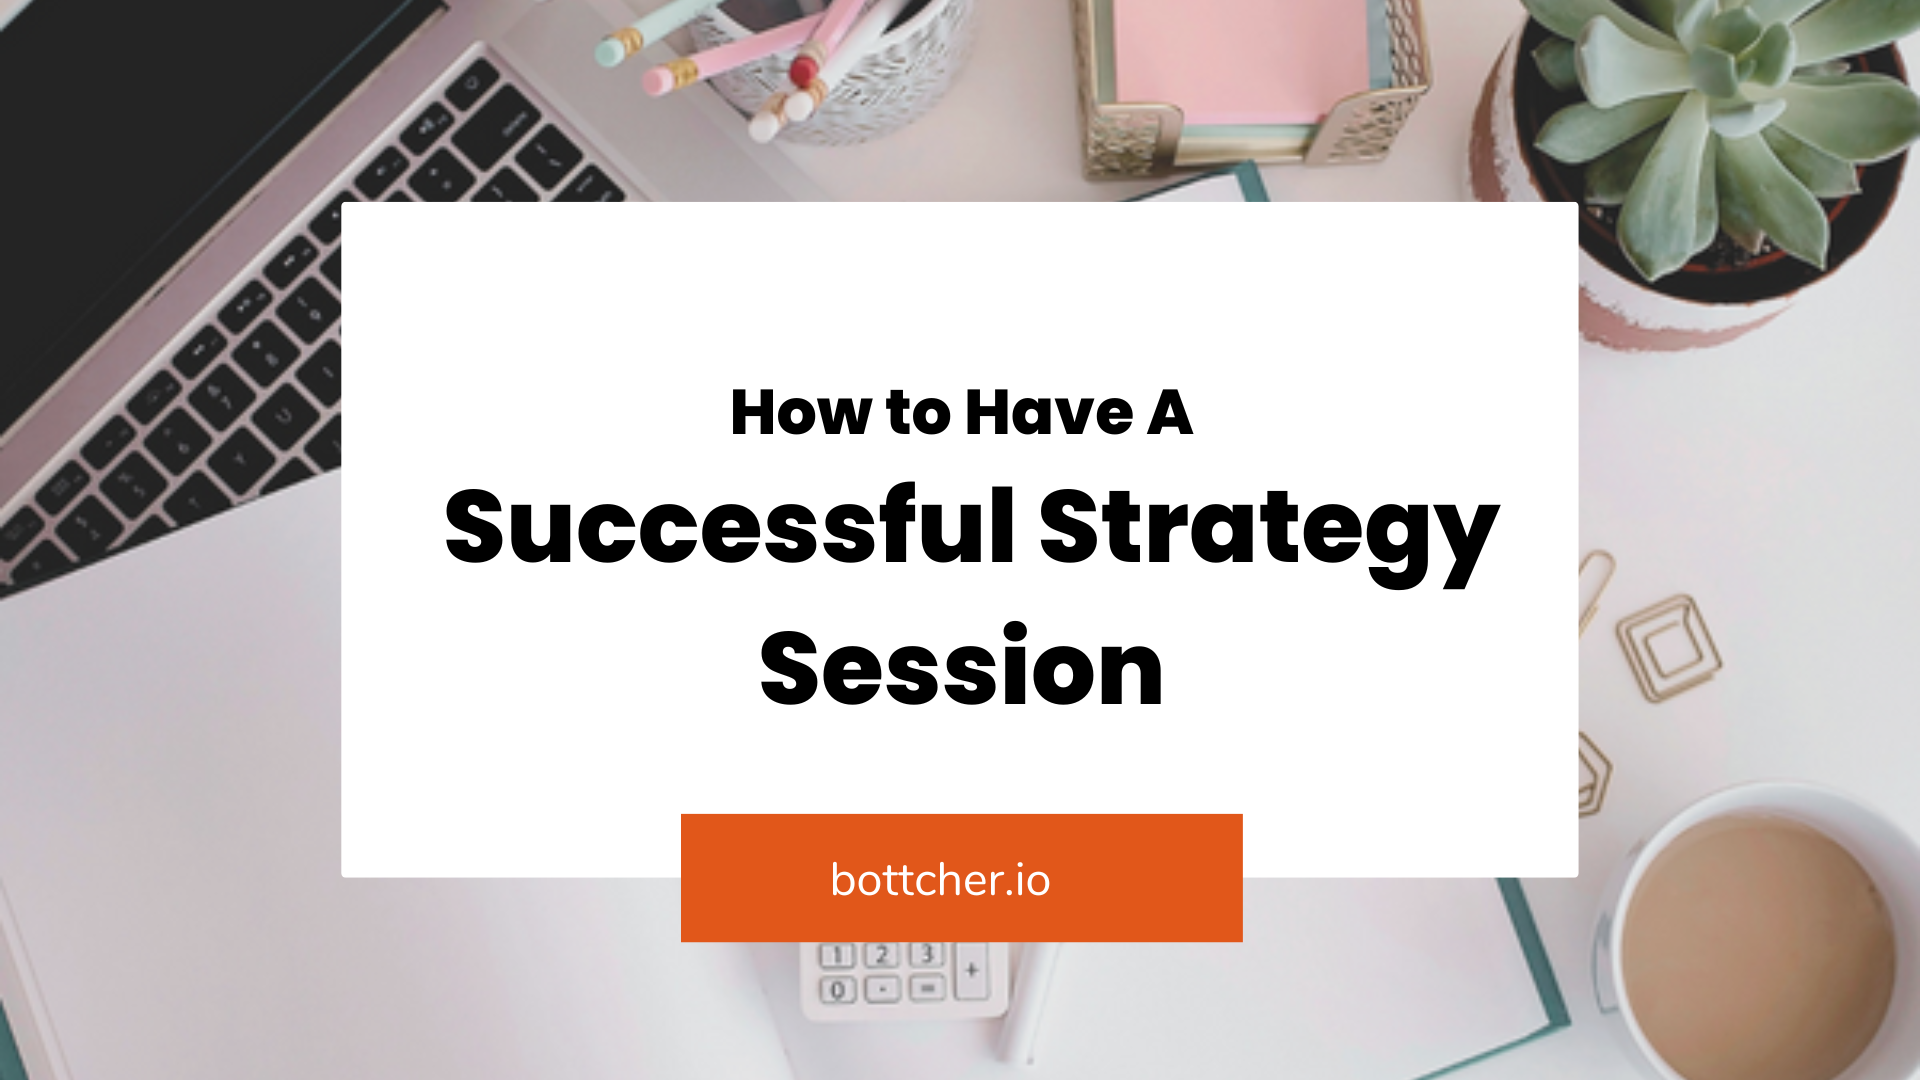 How to Have A Successful Strategy Session